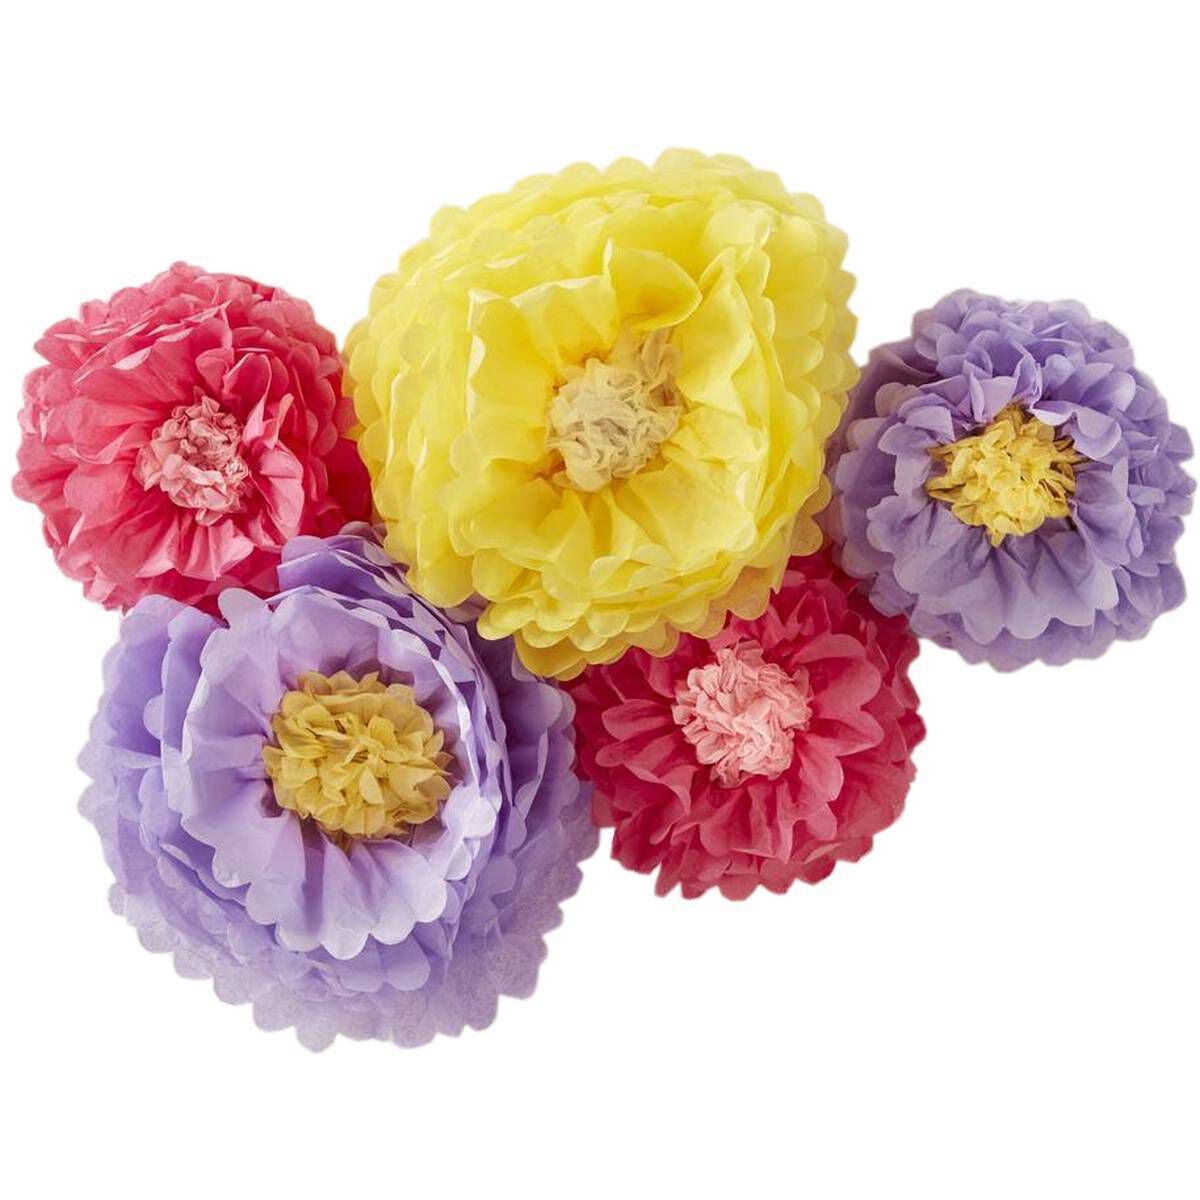 Very Large Assorted Pom Poms for DIY Creative Crafts Decorations 50Pack 2.5 Inch Assorted Colors 